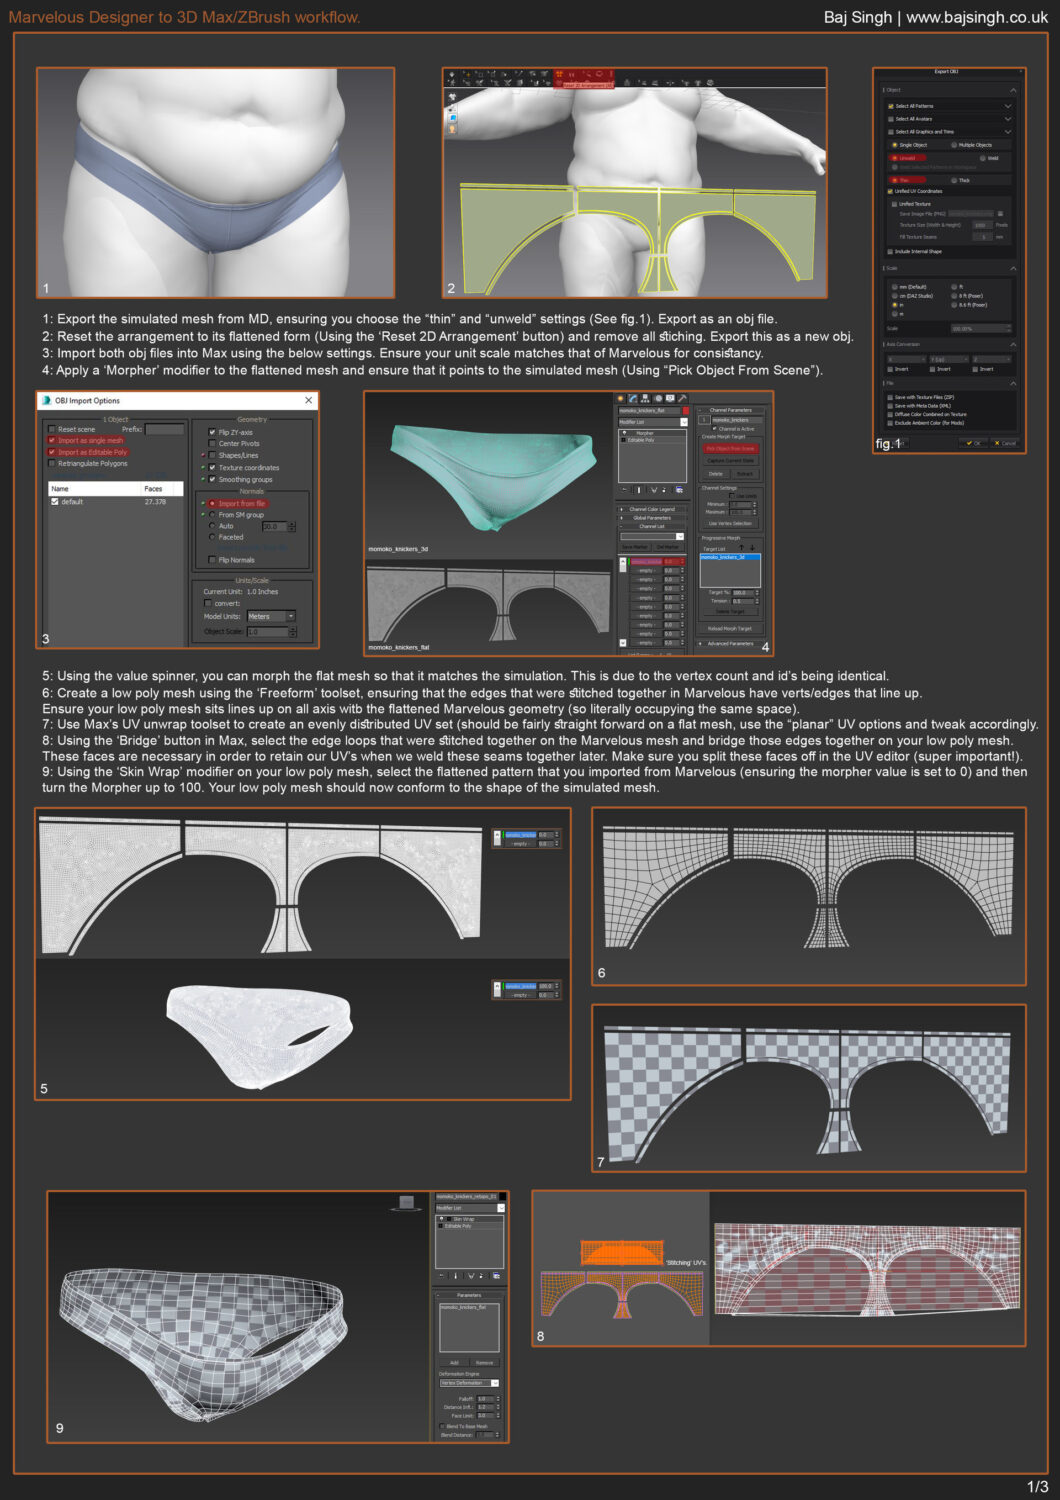 Marvelous Designer to 3D Max/ZBrush workflow _ By Baj Singh Marvelous Designer Marvelous Designer,3D Max